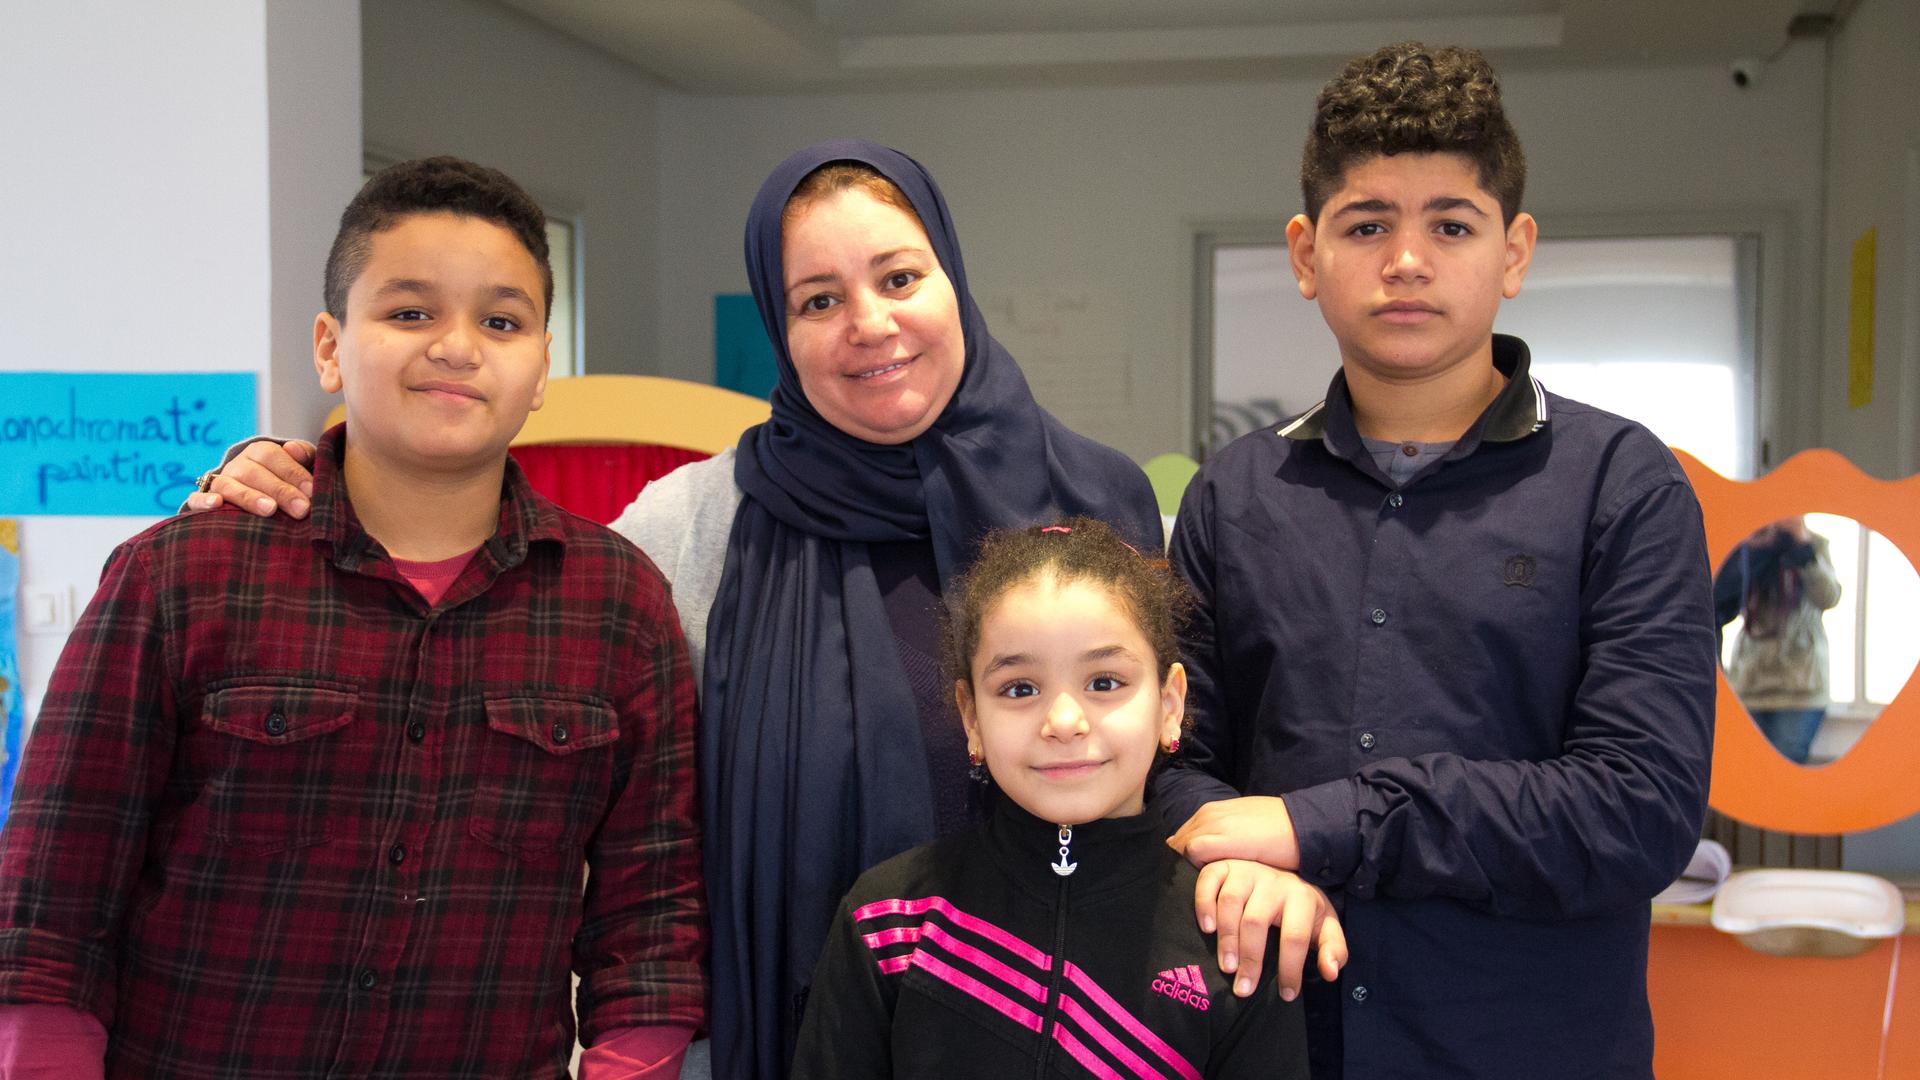 Fatima Elahmer and her three children, Mohamed, Anoud, and Ali. They've been living in Tunis since last summer.